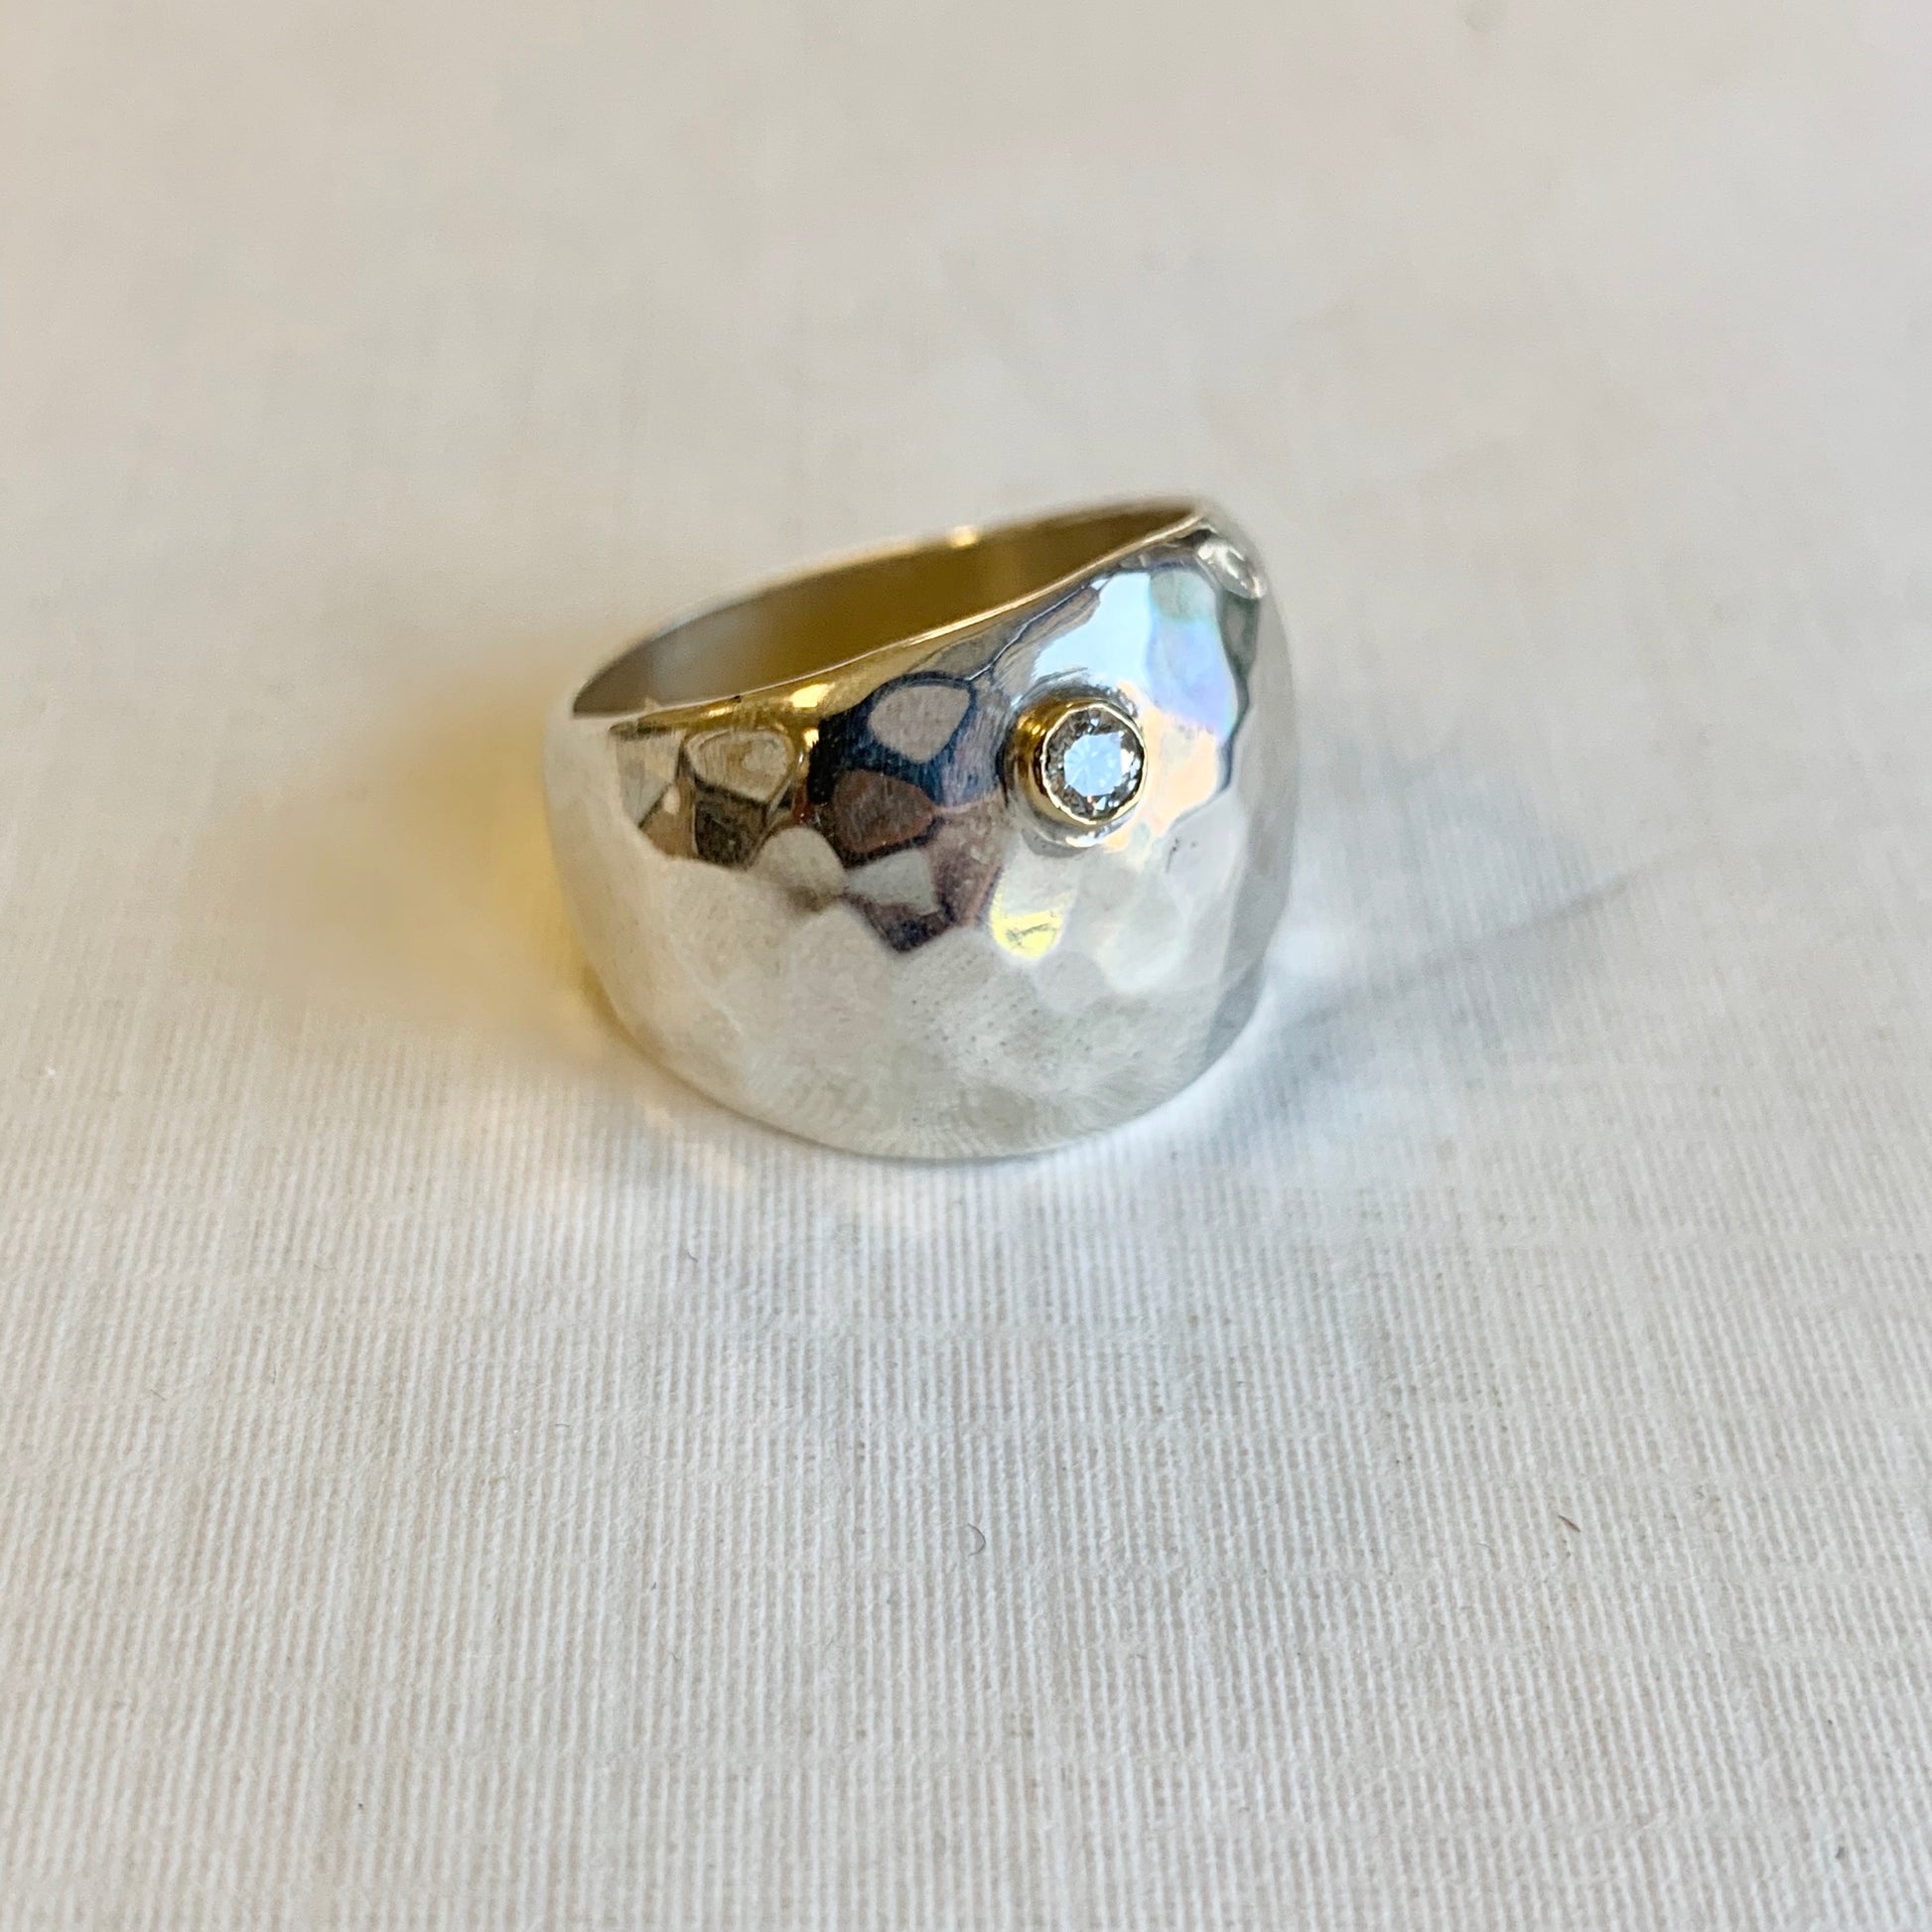 Hammered Cigar Band Ring with Diamond and Gold Bezel Rings Richard Schmidt   